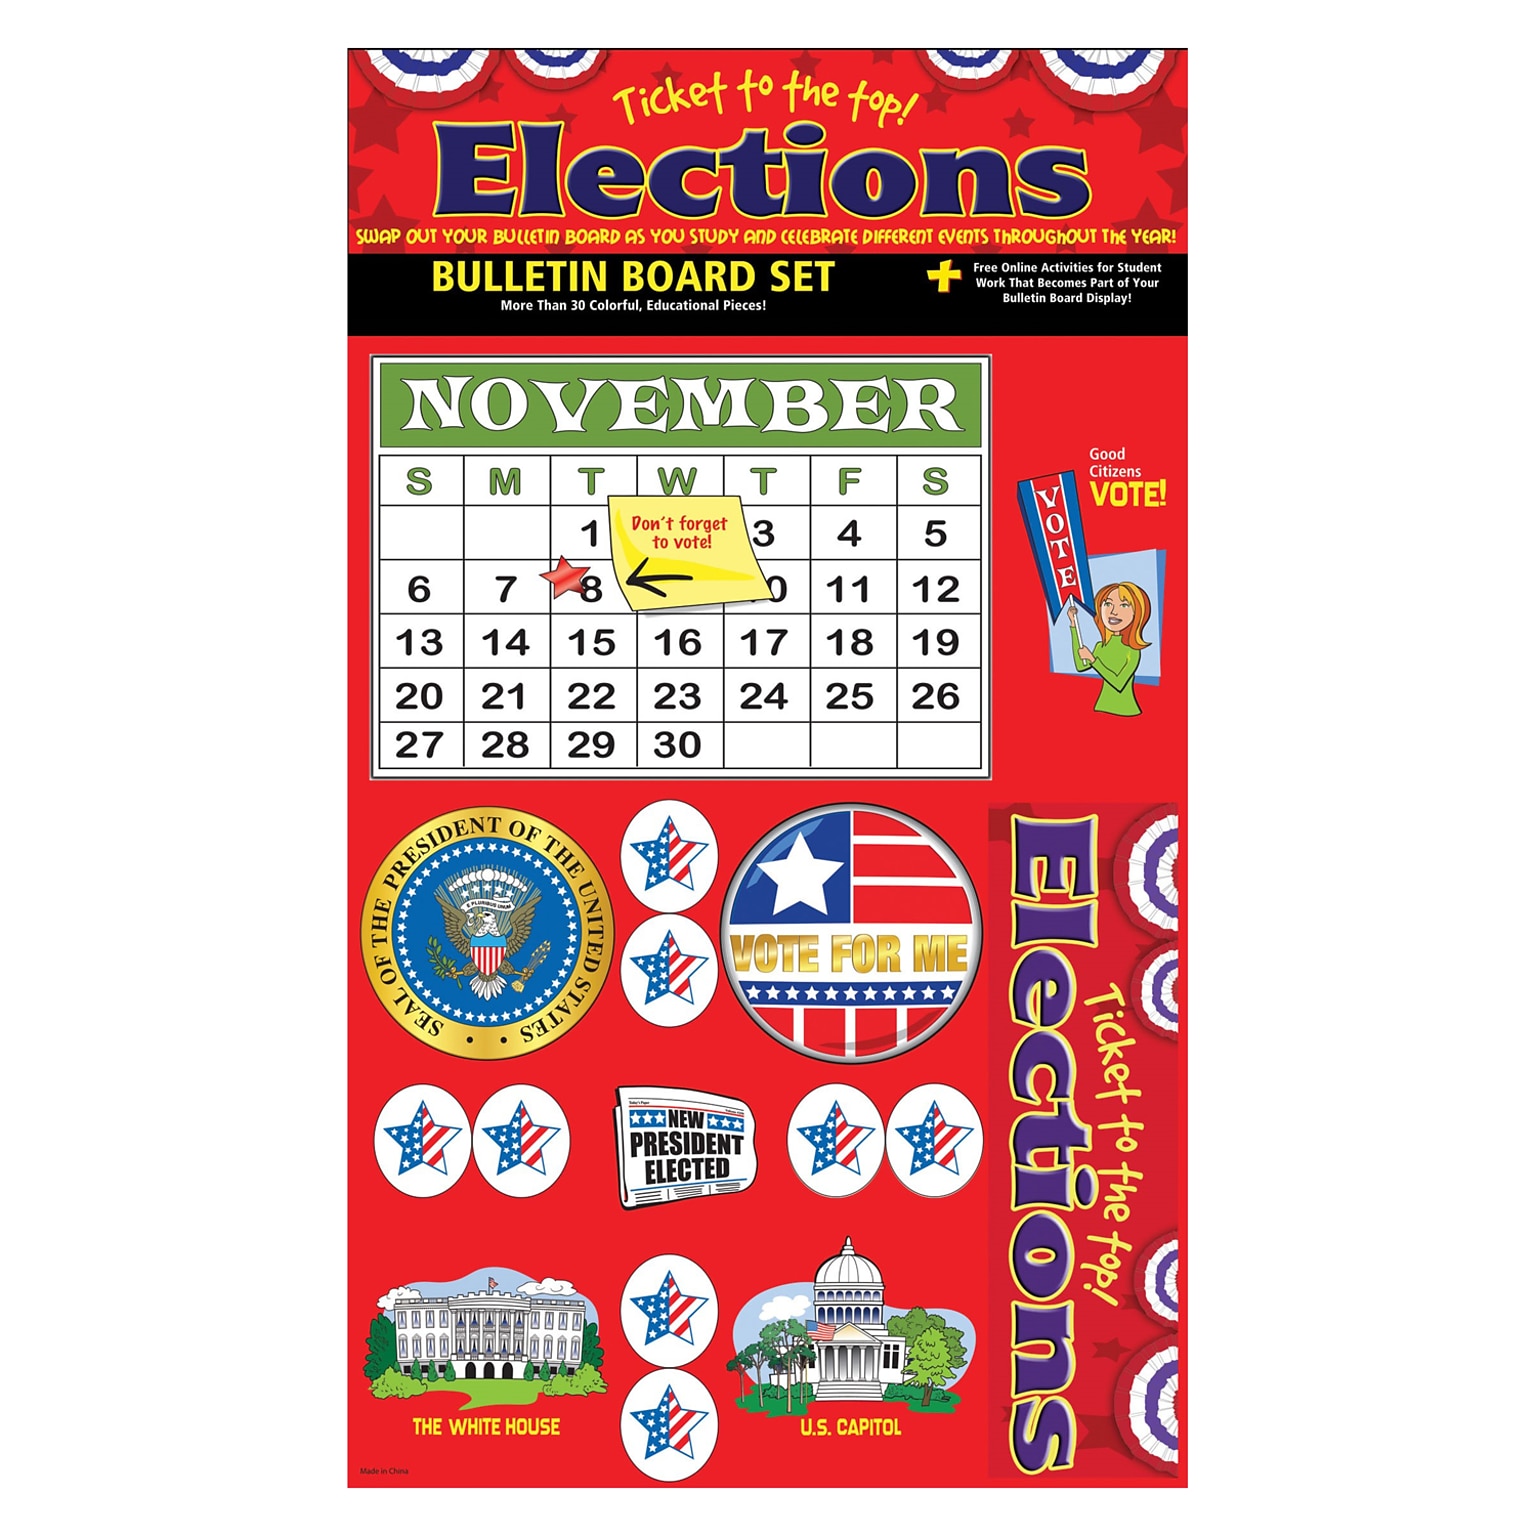 Gallopade Ticket to the Top, Presidential Elections Bulletin Board Set (GALBBBELEBUL)